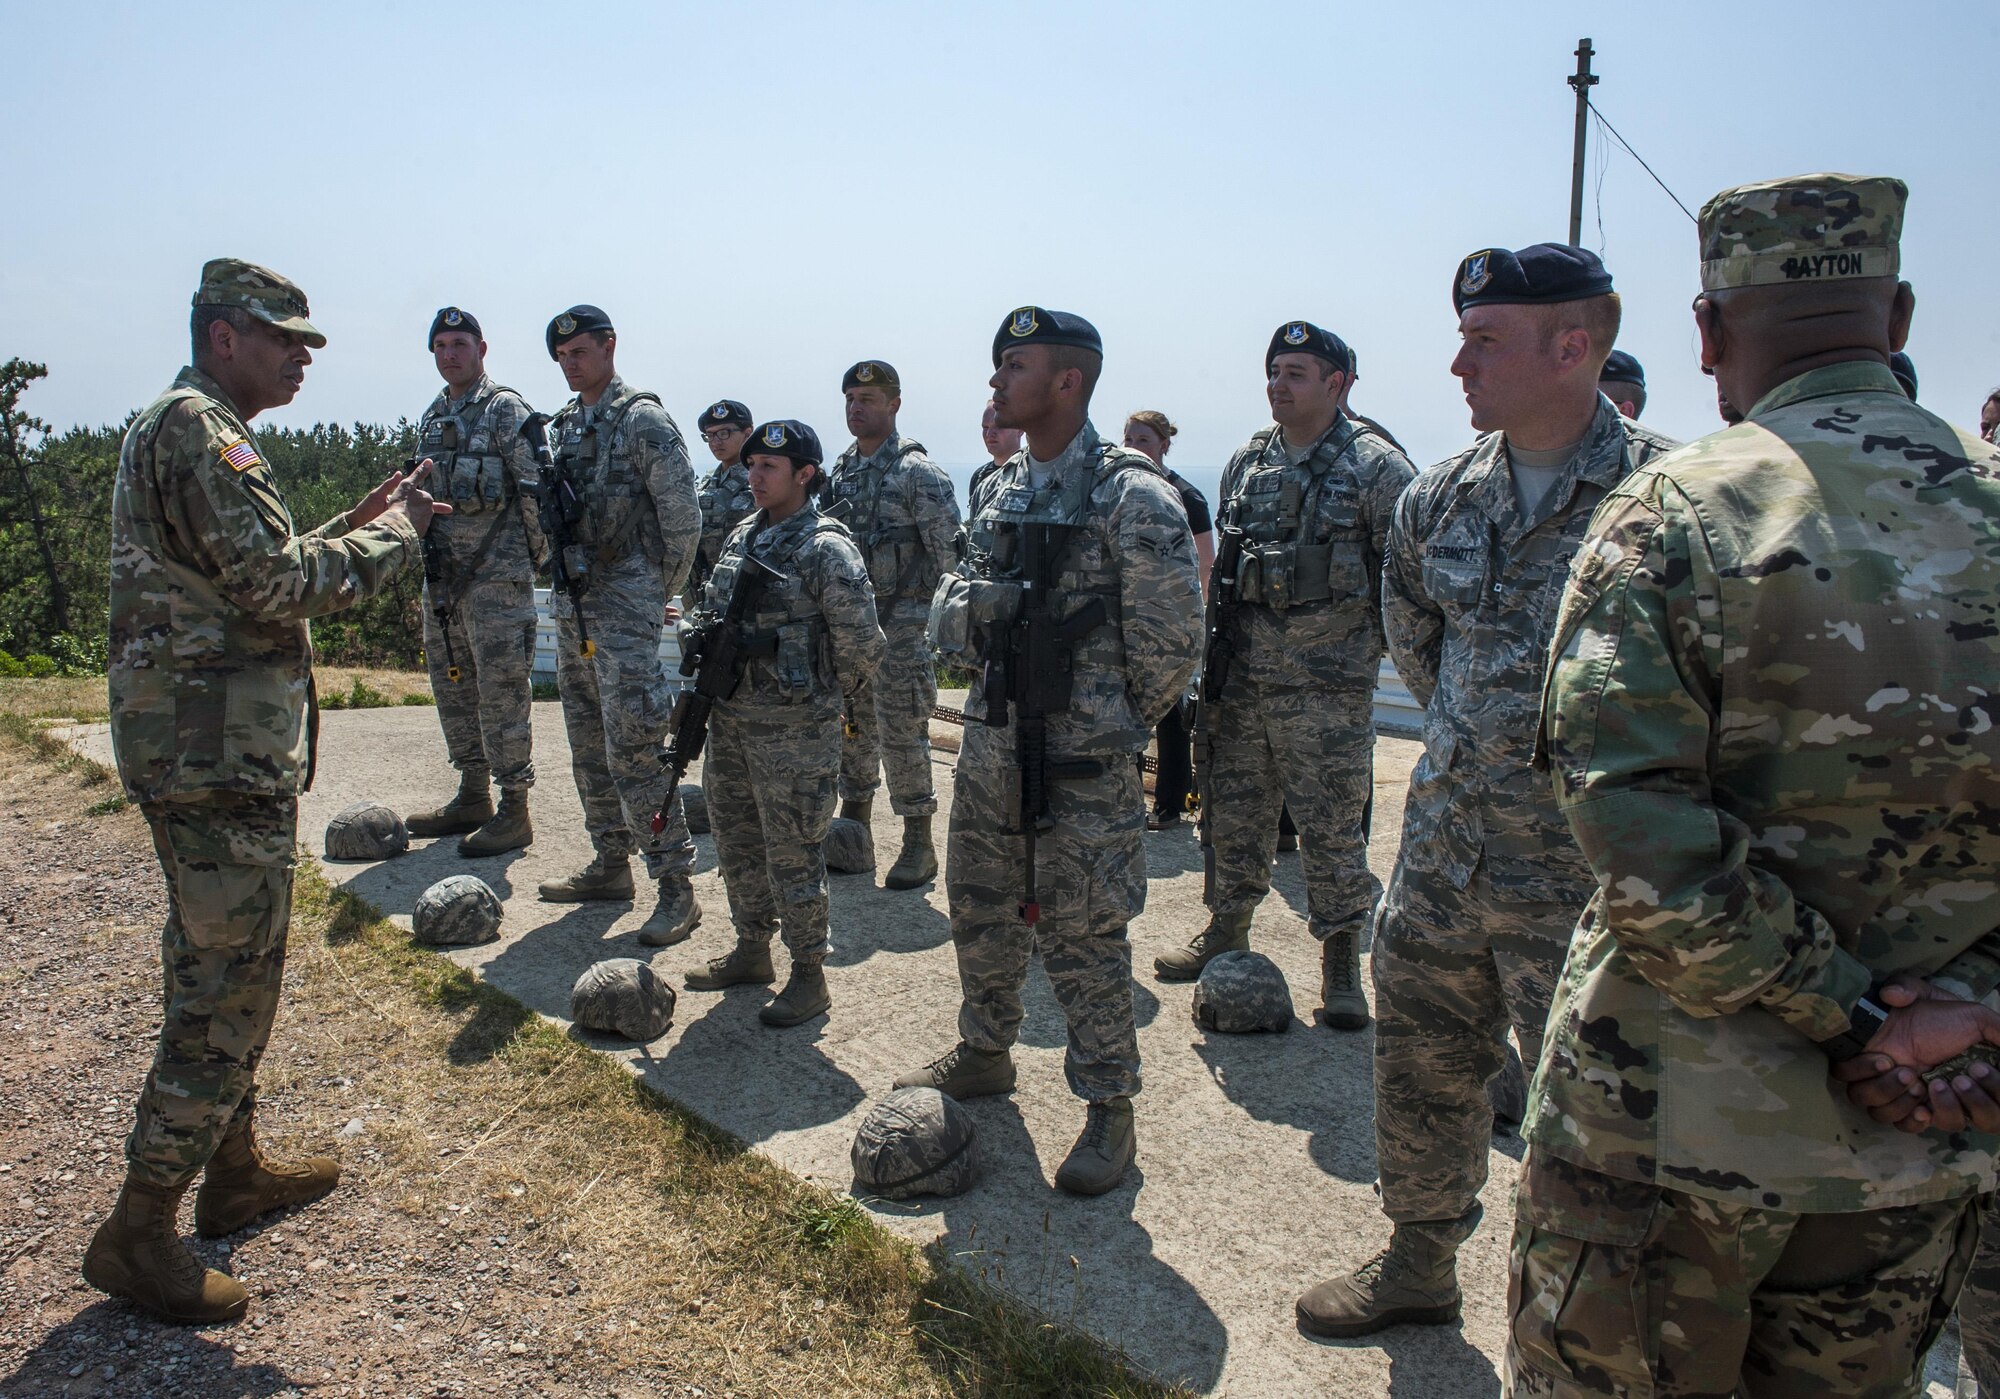 U.S. Army Gen. Vincent K. Brooks, United States Forces Korea commander, speaks with Airmen assigned to the 8th Security Forces Squadron at Kunsan Air Base, Republic of Korea, June 22, 2017. The 8th SFS showcased their role in the first priority of the Wolf Pack’s mission, “Defend the Base.” (U.S. Air Force photo by Senior Airman Colville McFee/Released)